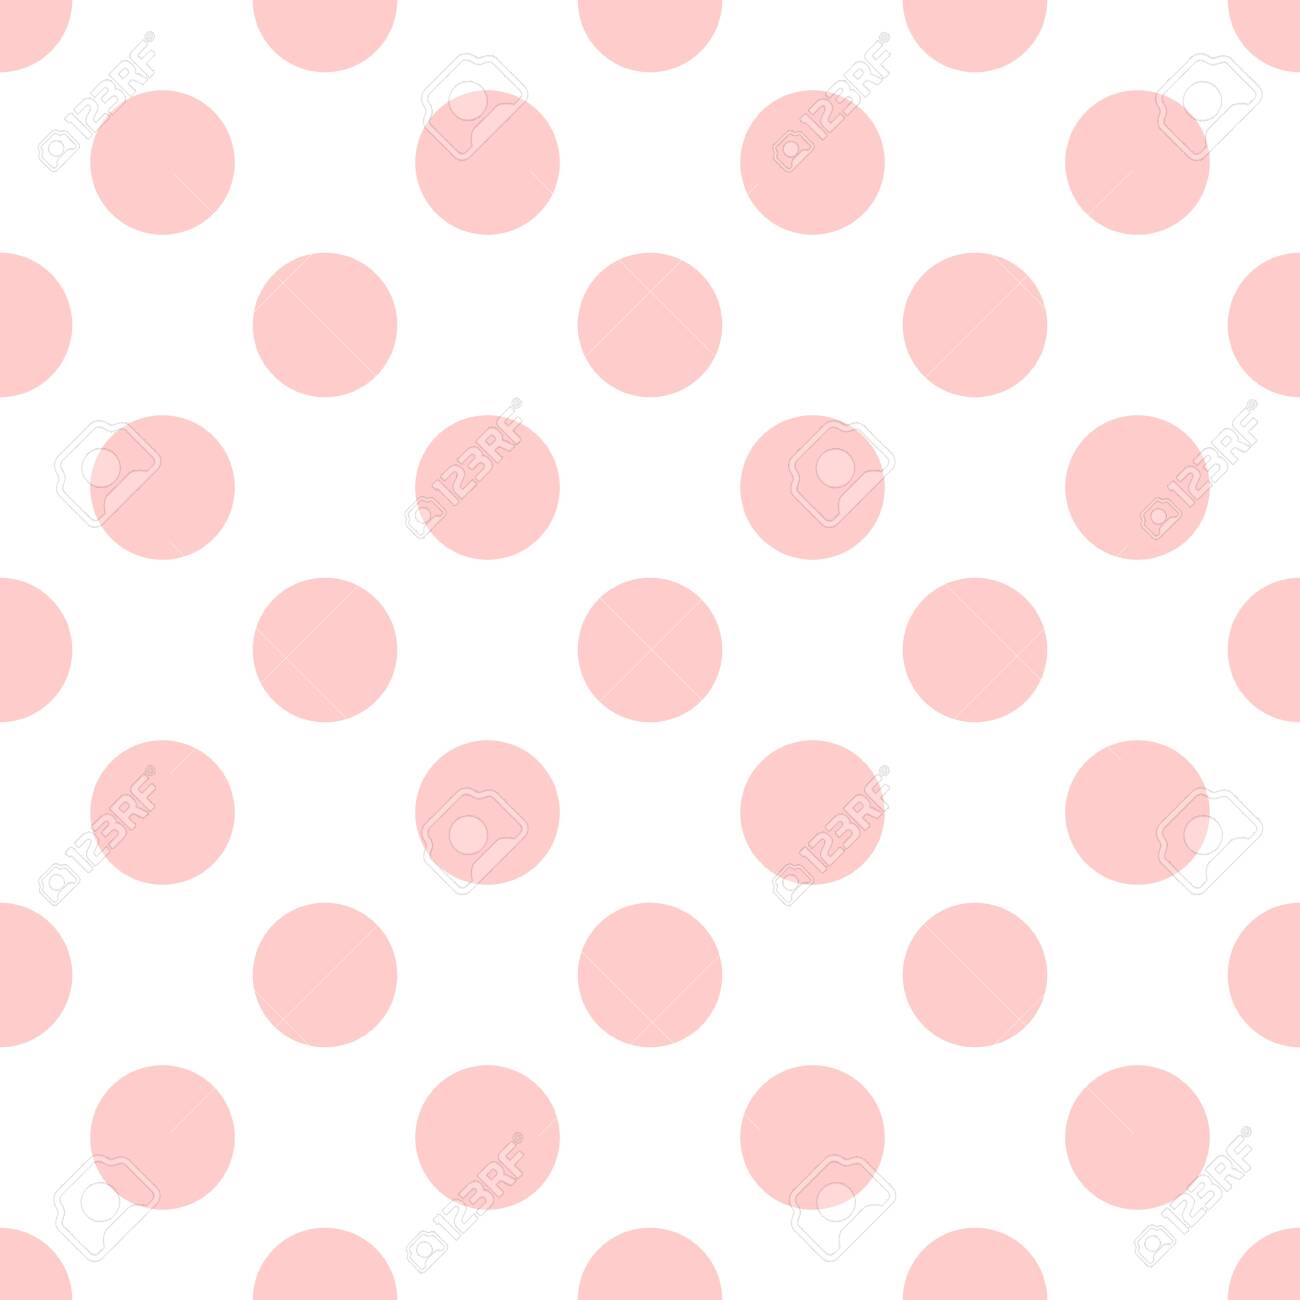 Seamless Vector Pattern With Pink Polka Dots On White Background